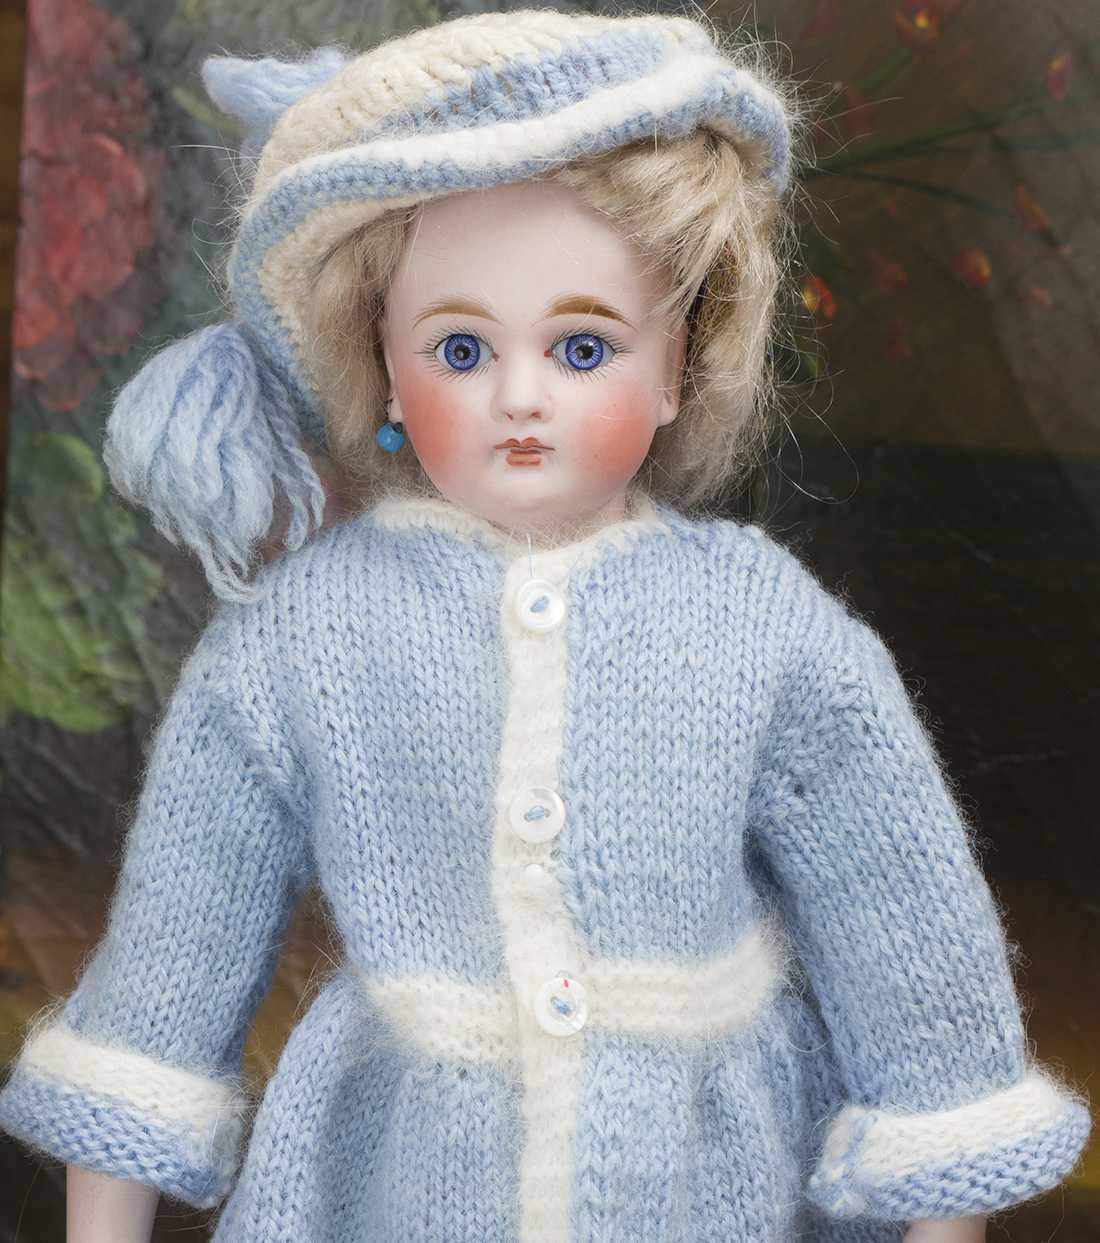 Vintage coat and hat for doll